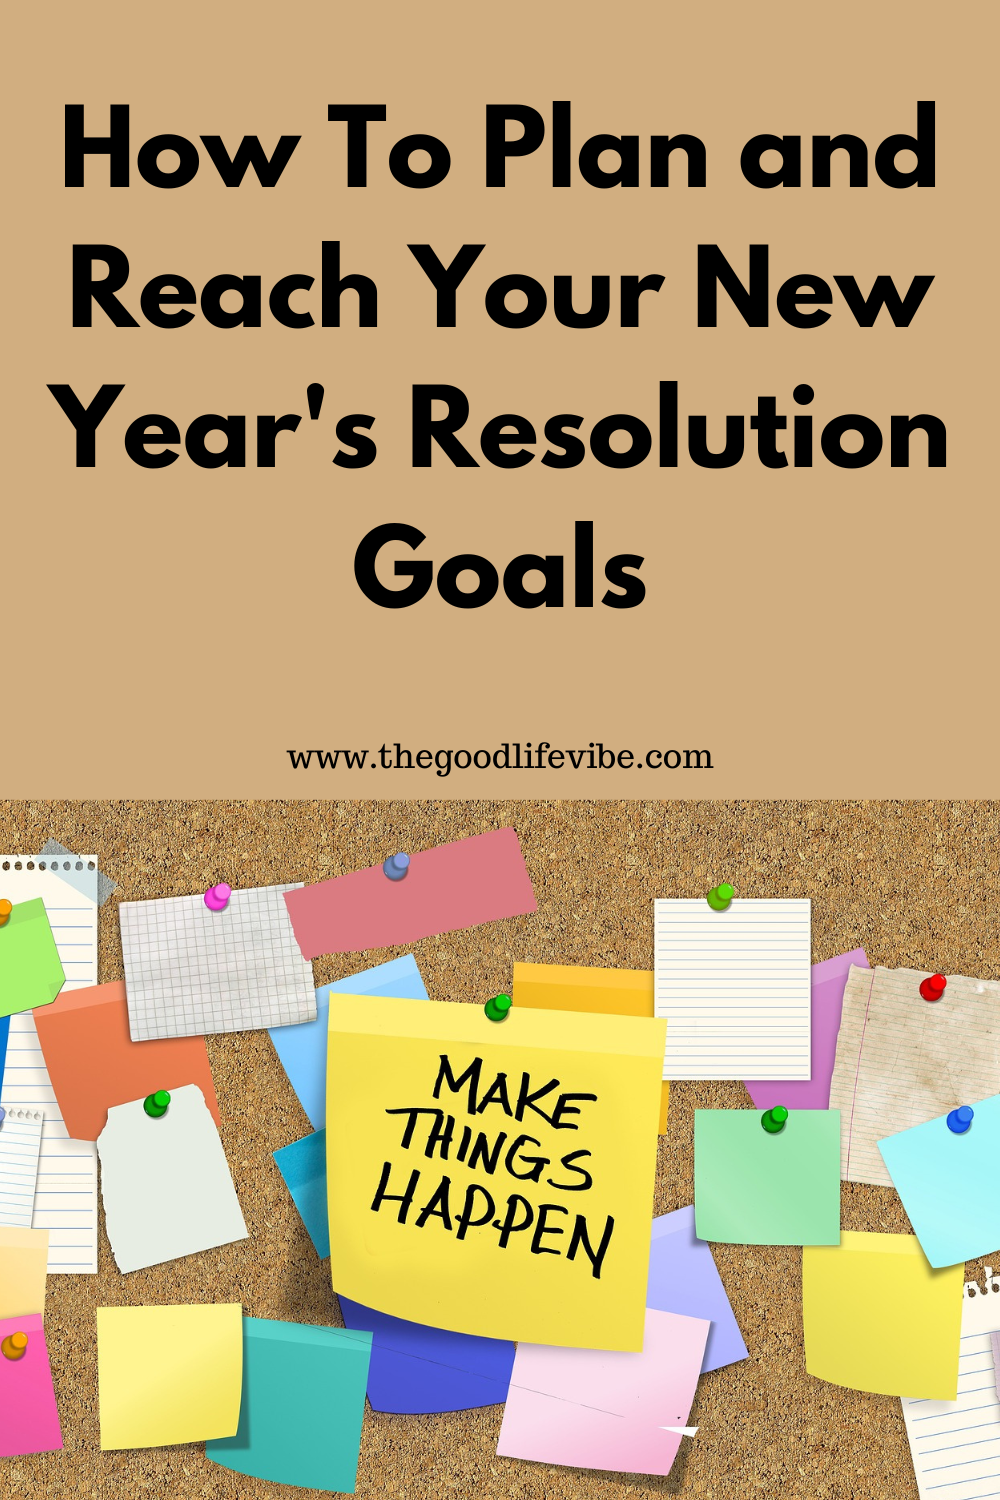 How To Plan and Reach Your New Year's Resolution Goals